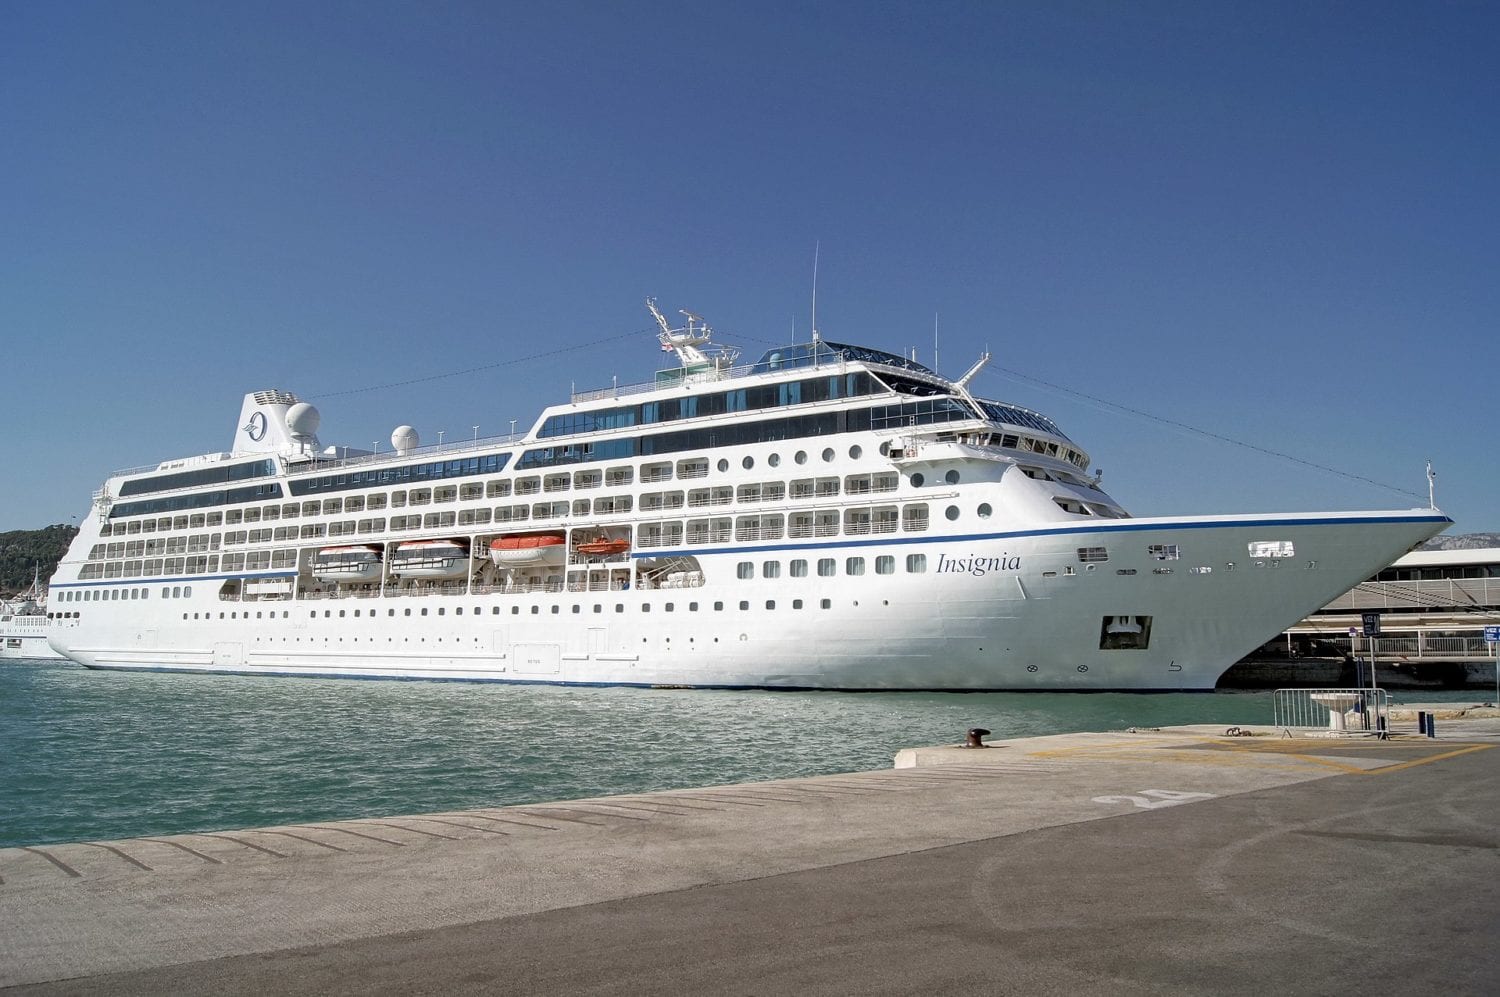 Image of cruise ship from Oceania, Insignia